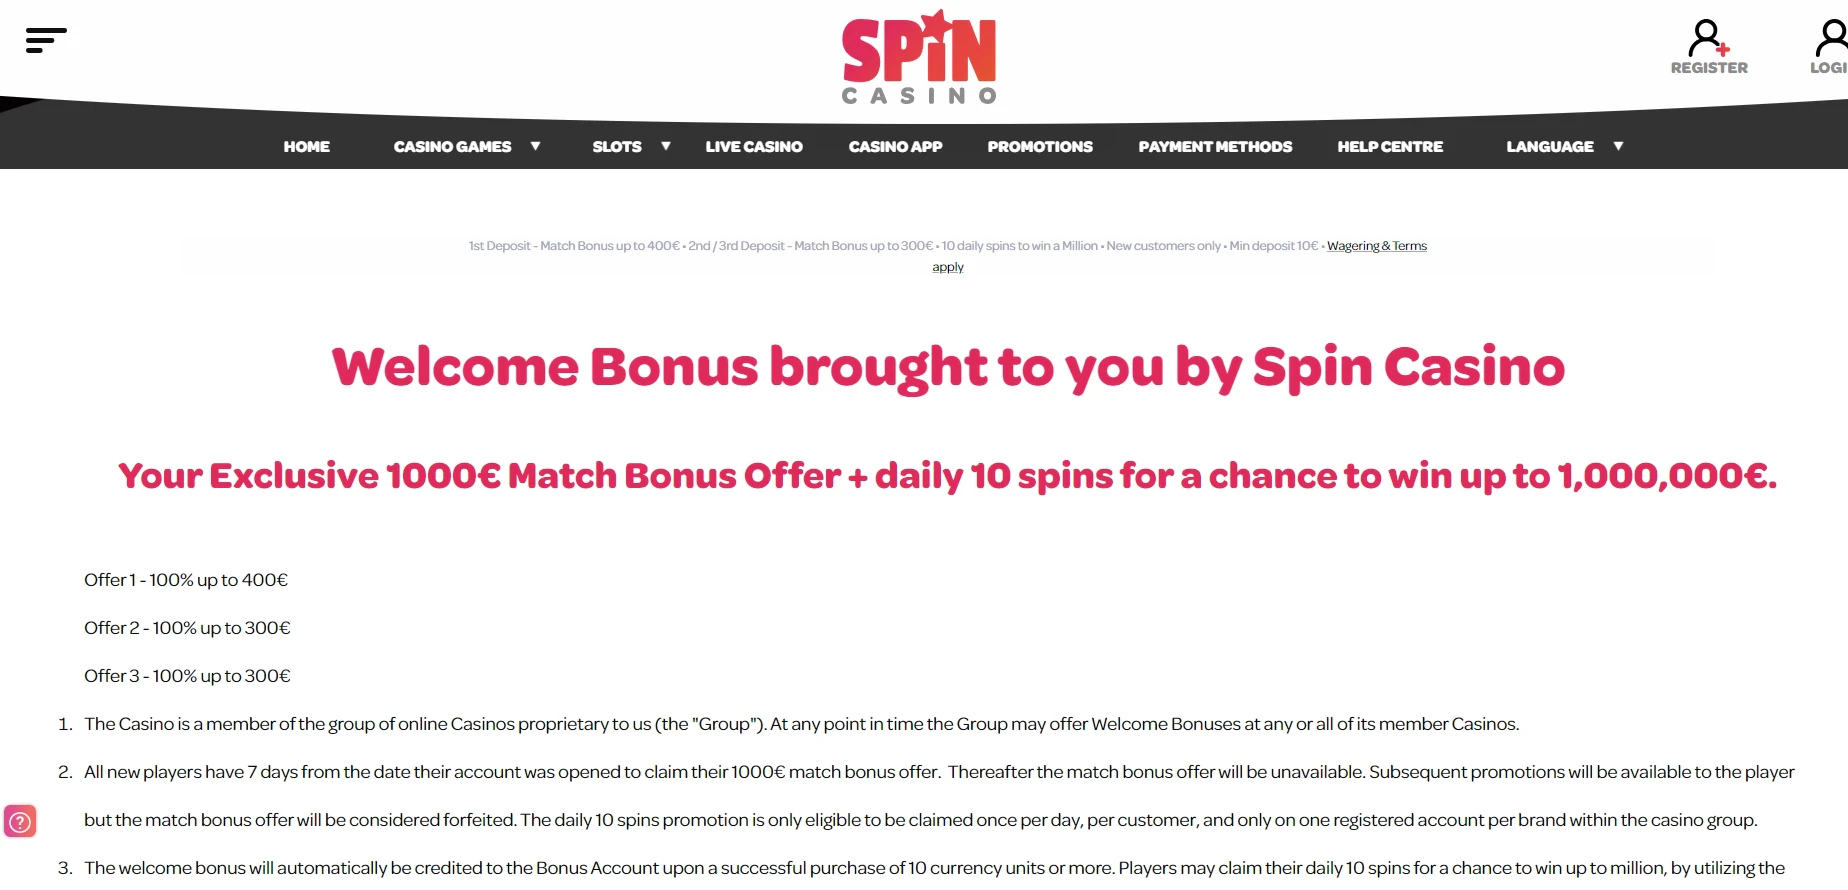 Spin Casino terms and conditions